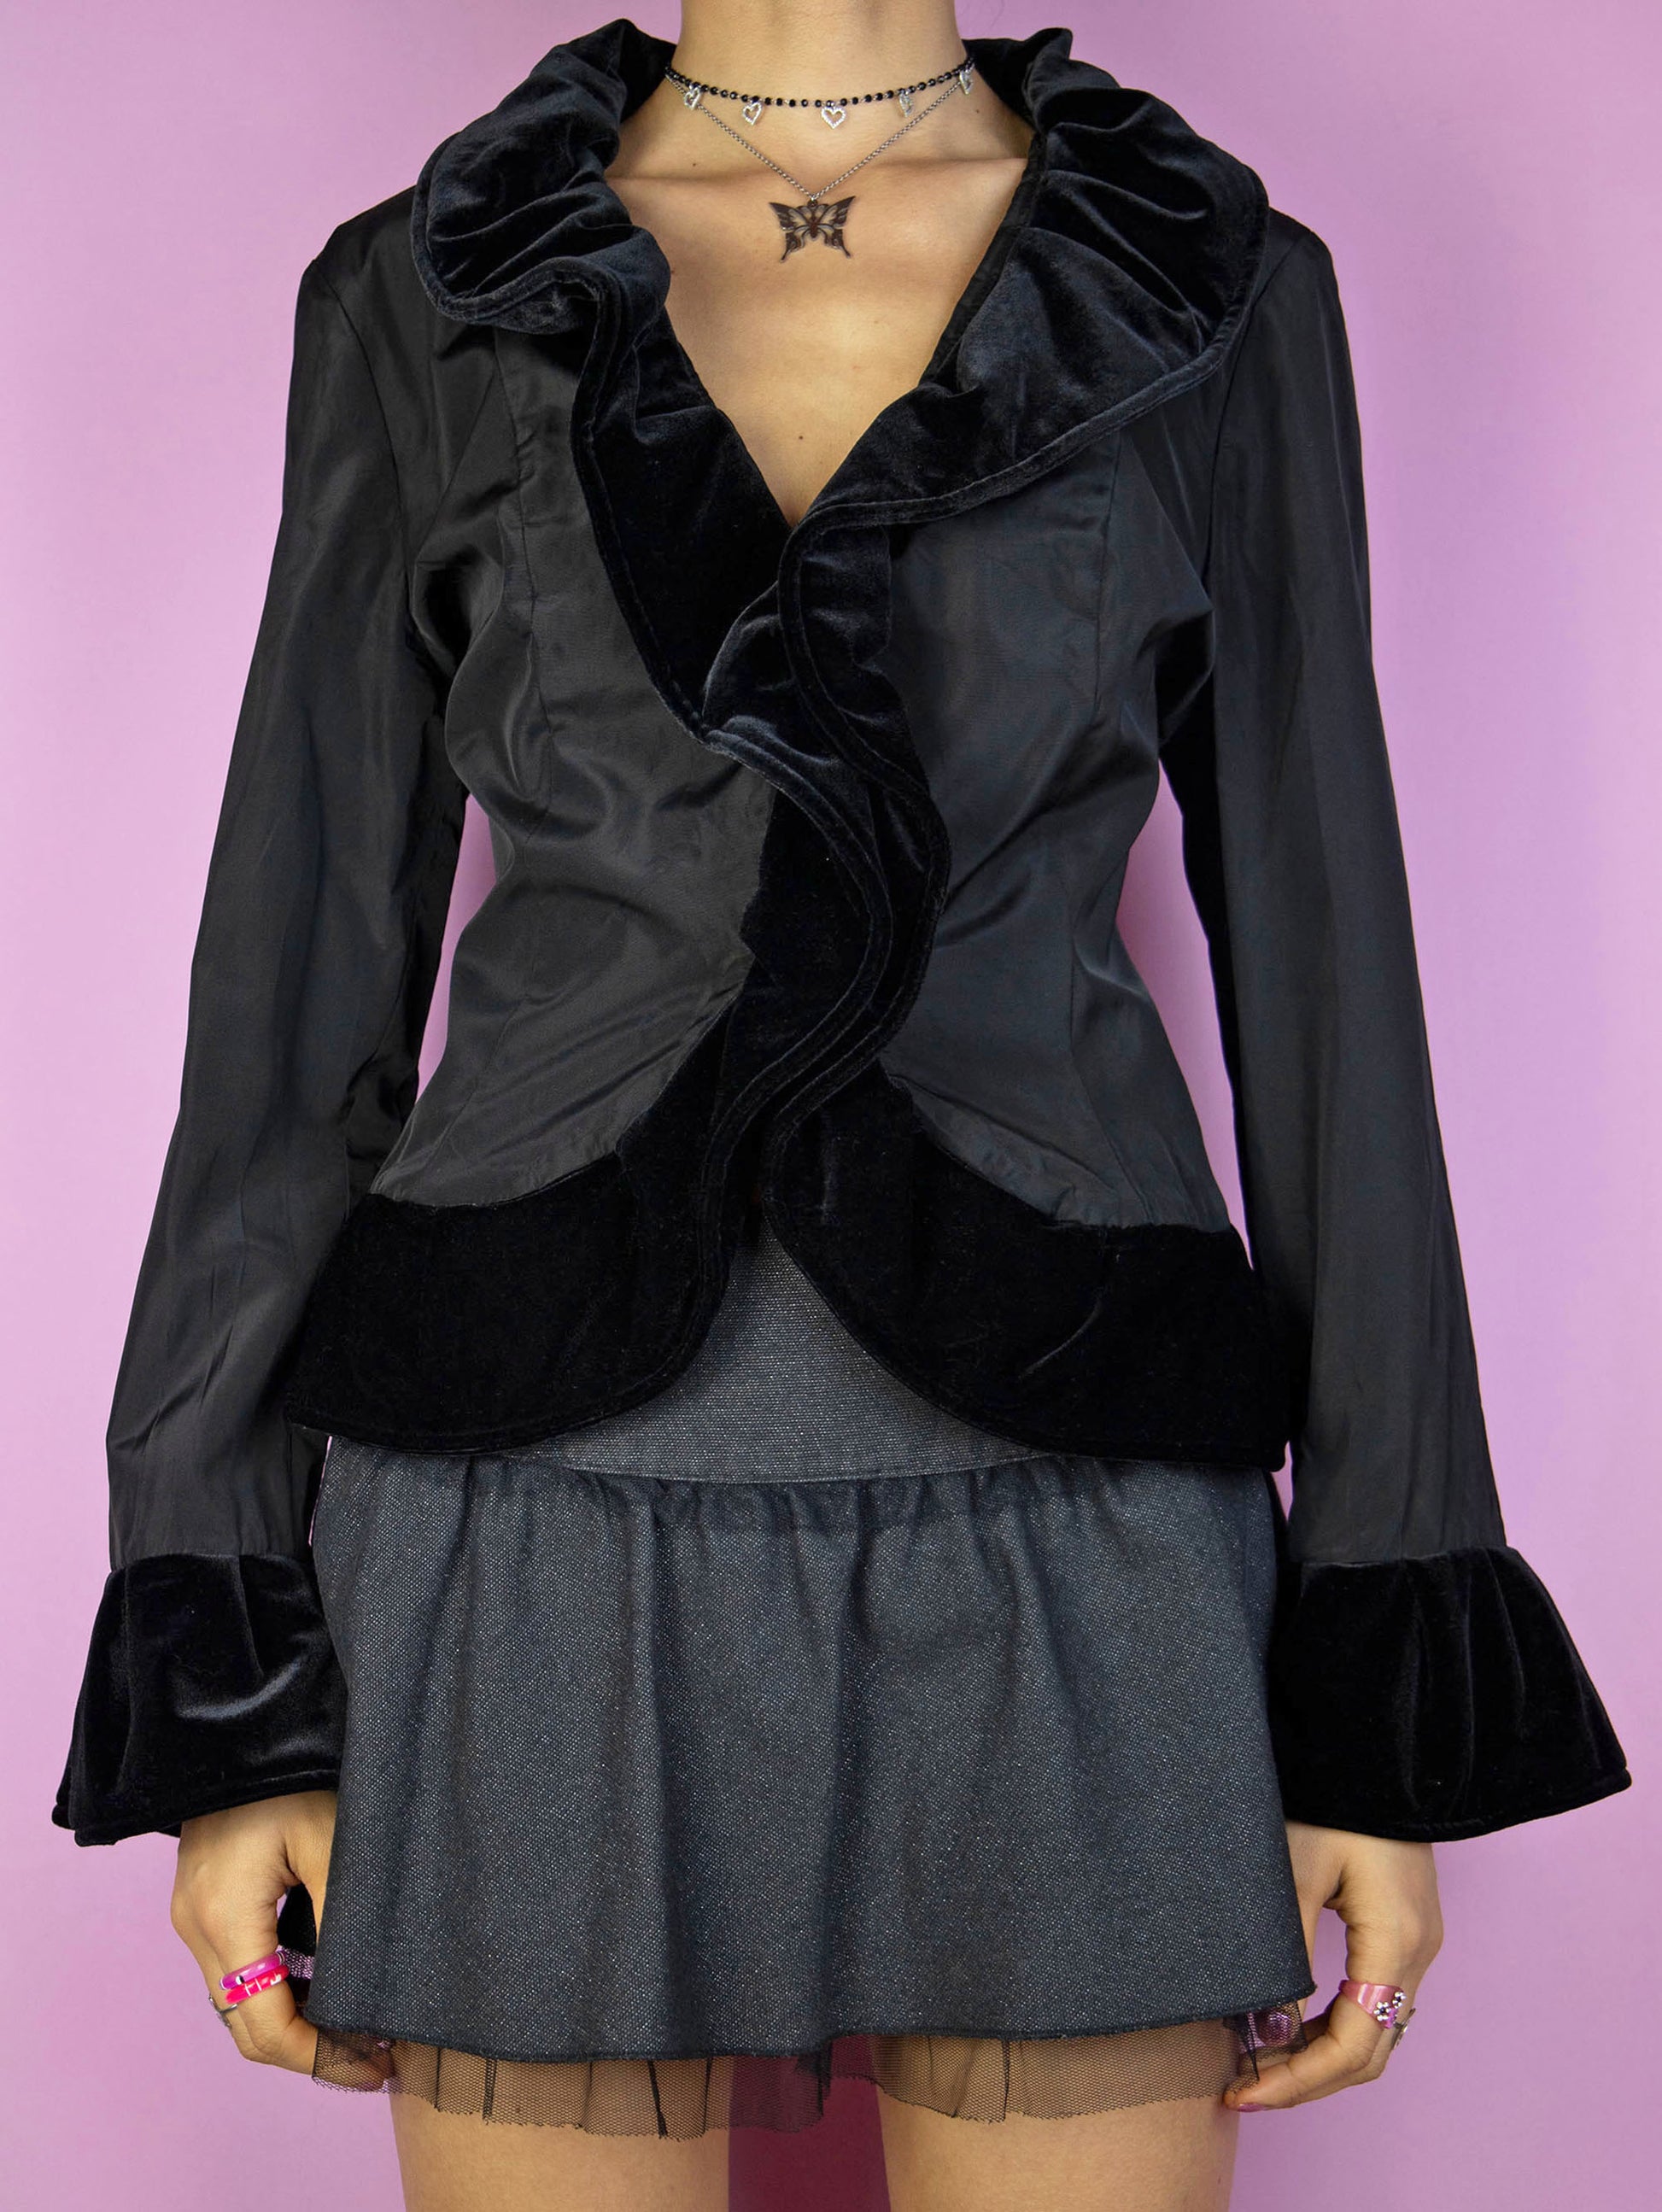 The Vintage 90s Black Ruffle Jacket is an elegant, romantic, whimsygoth-inspired statement piece, featuring velvet ruffle details and a front hook closure.